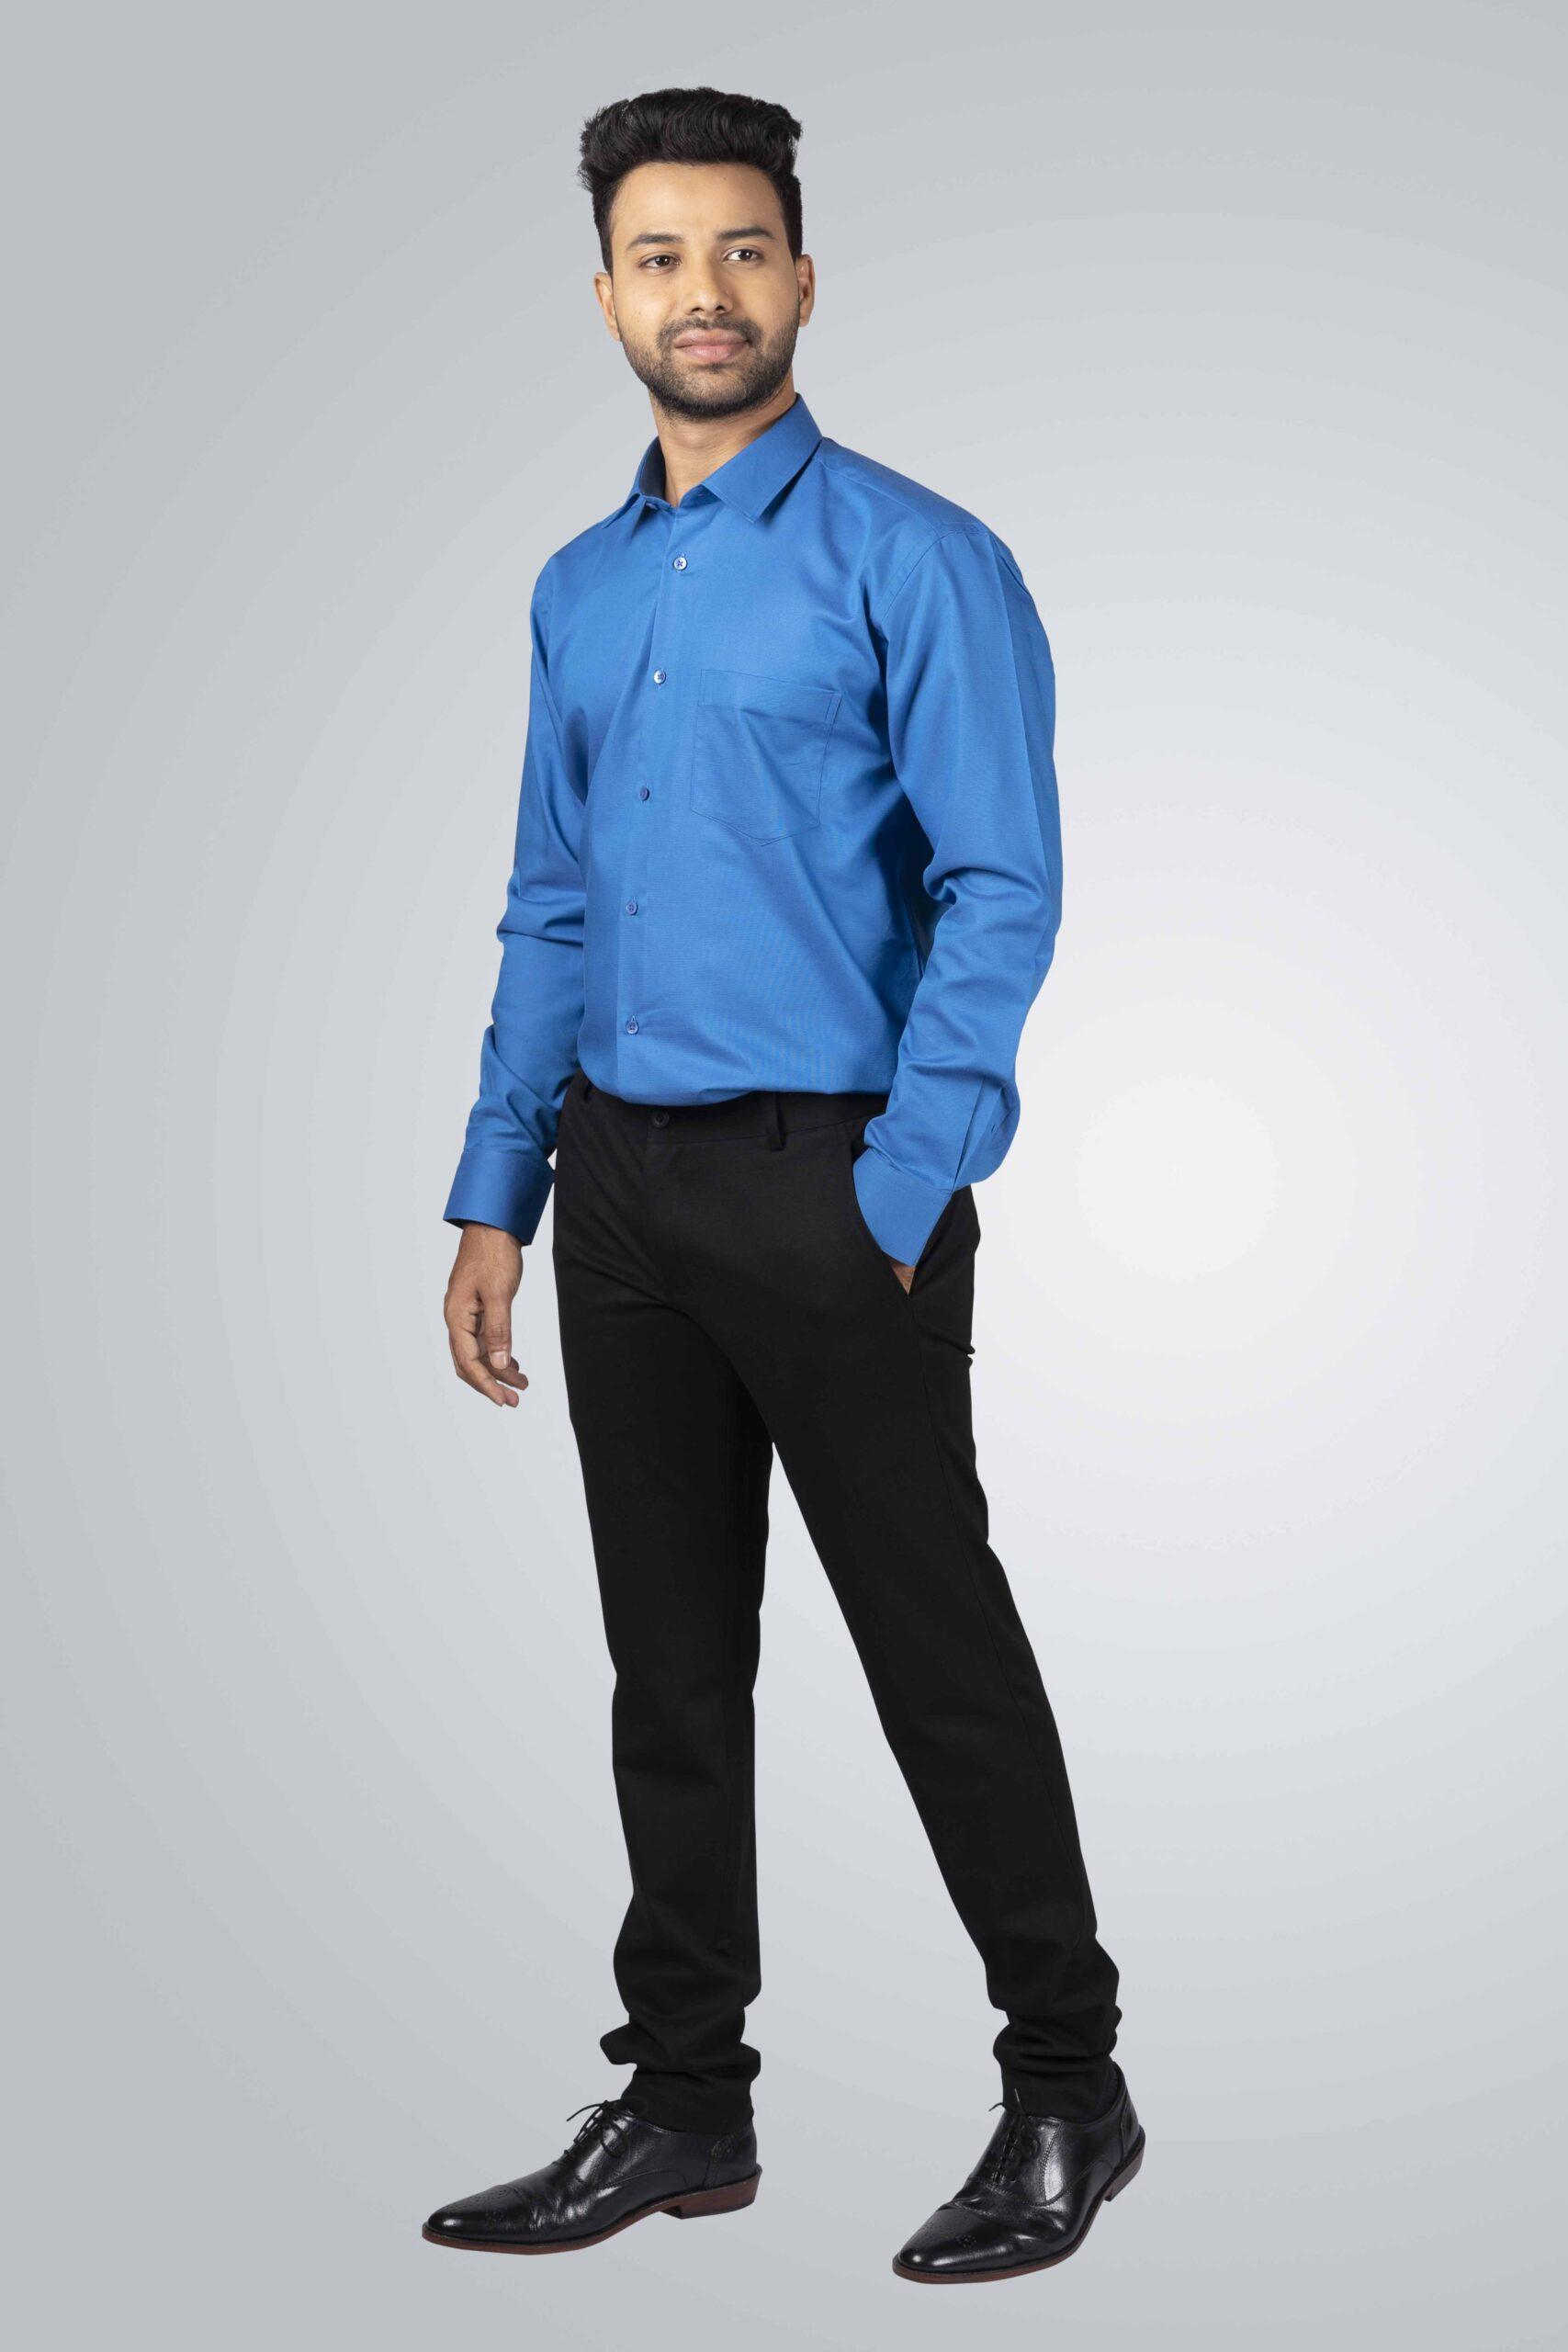 Second Life Marketplace - Mens Blue Shirt and Belted Black Trousers